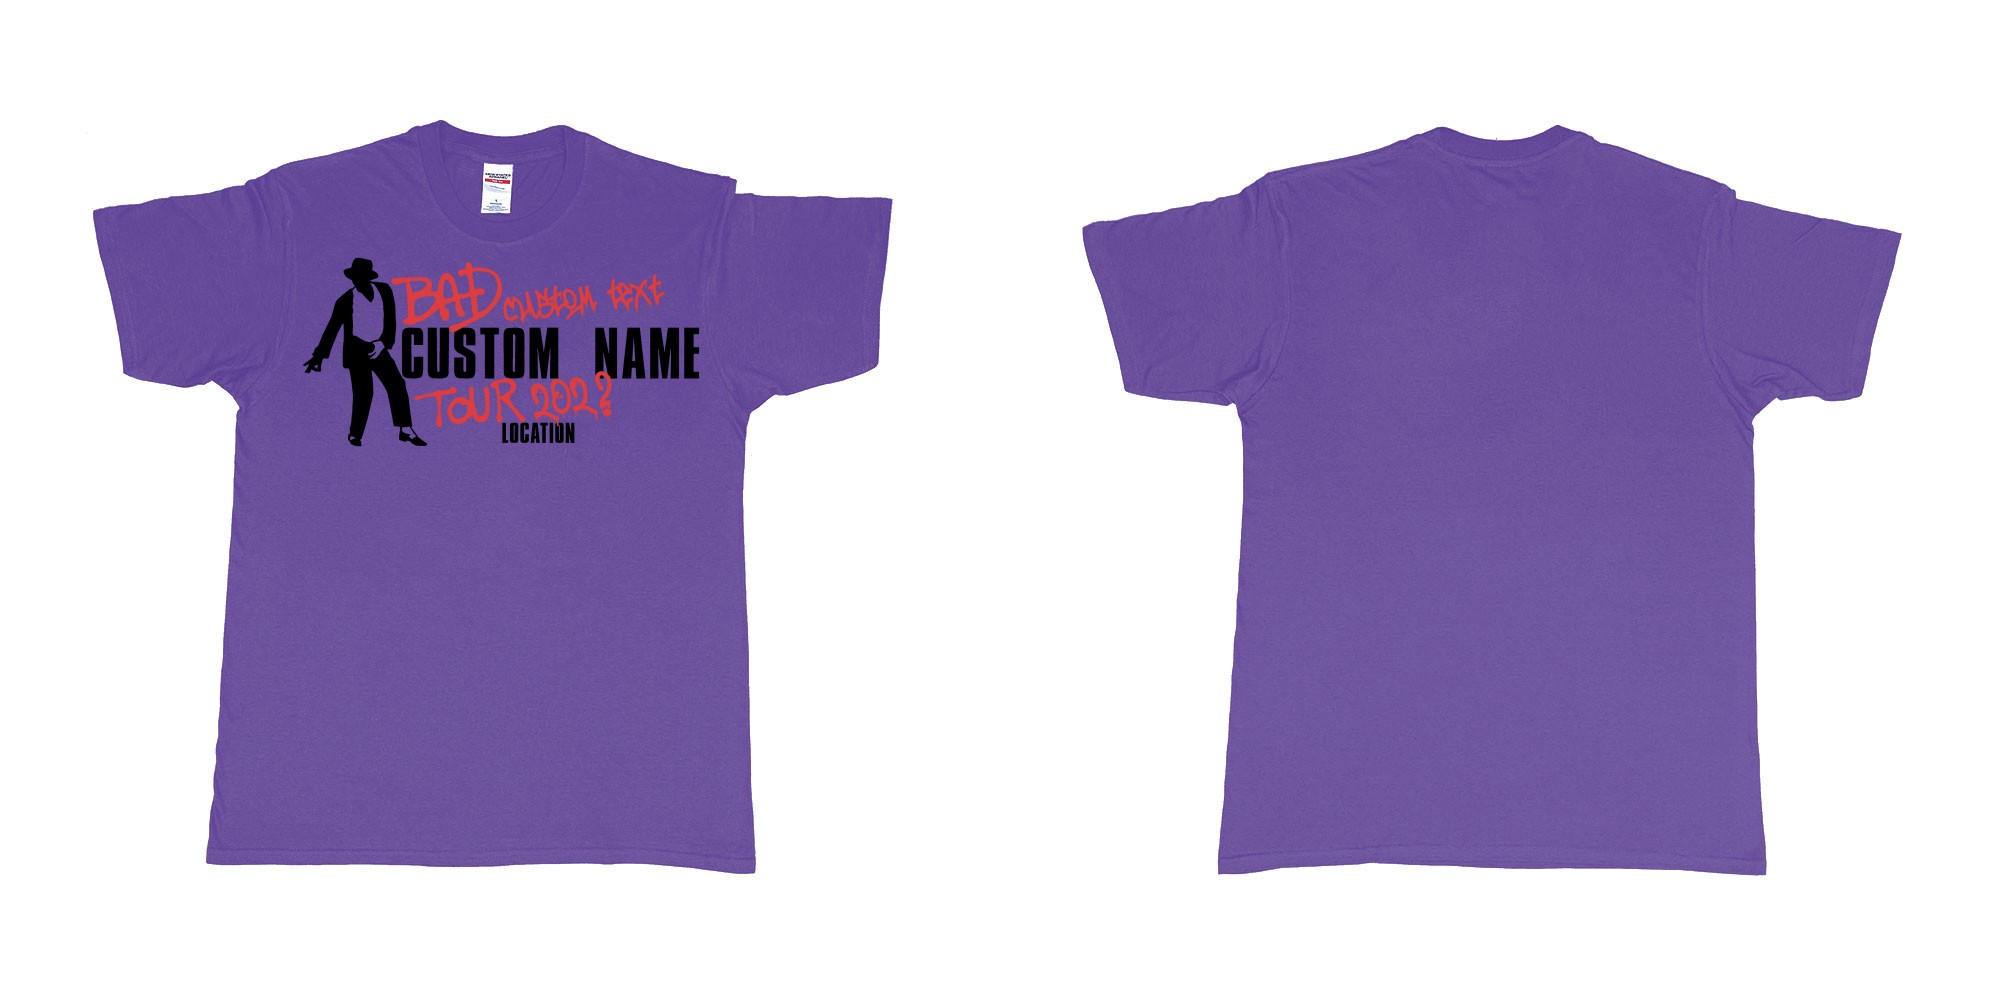 Custom tshirt design michael jackson bad tour custom name year location in fabric color purple choice your own text made in Bali by The Pirate Way